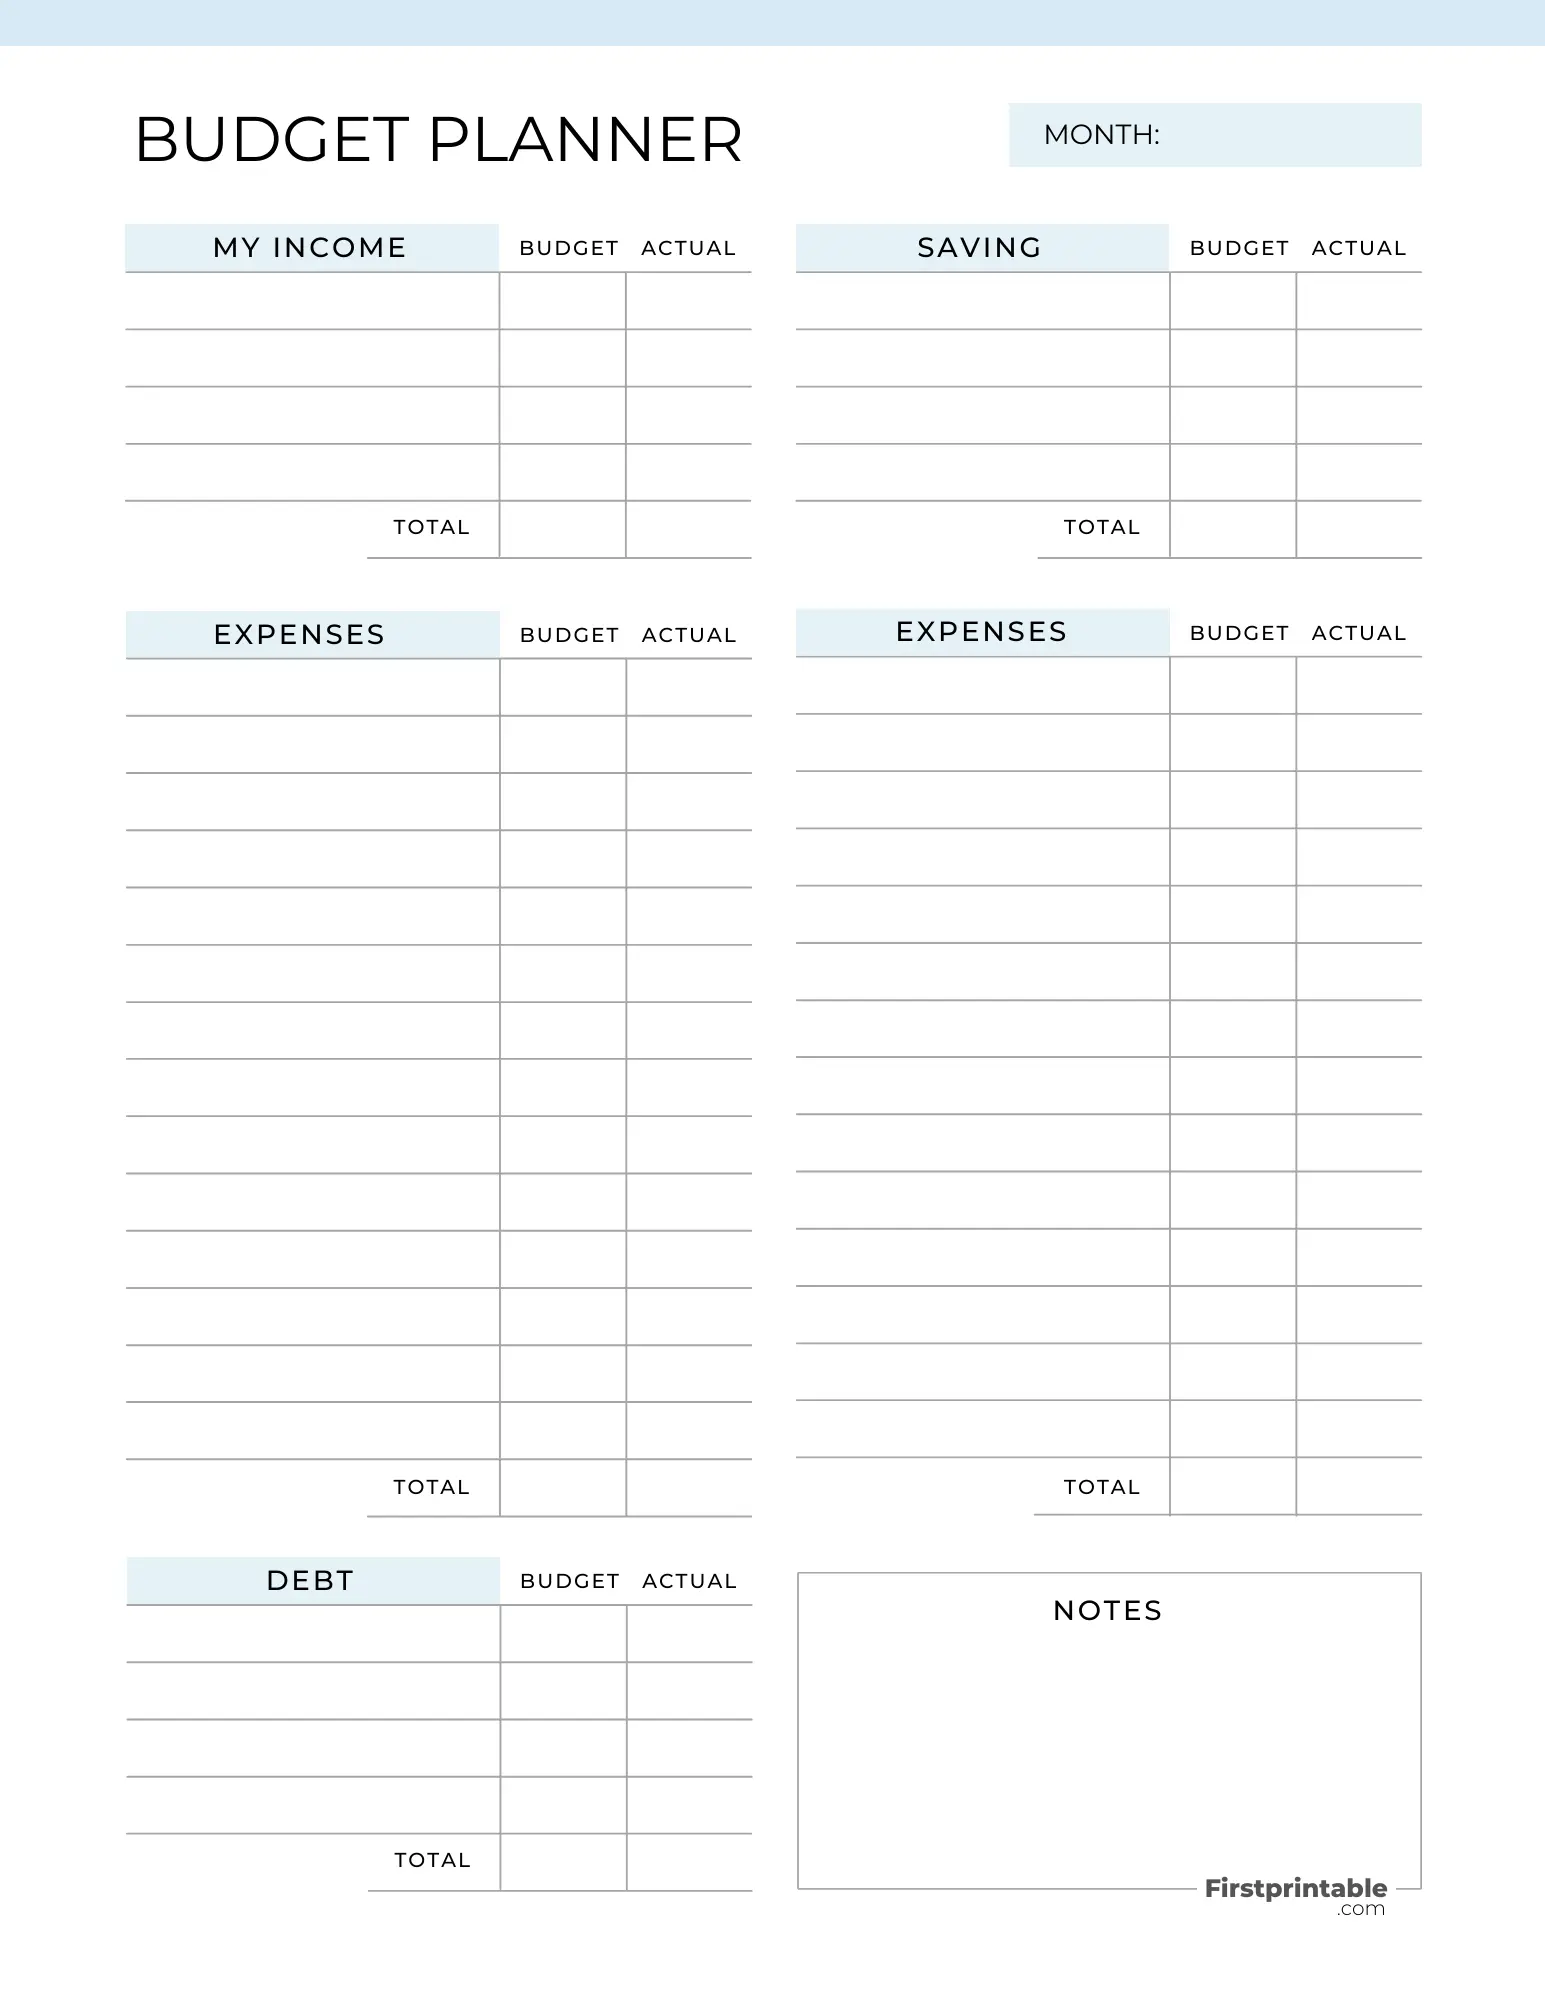 Monthly Budget Planner - aesthetic Blue Color